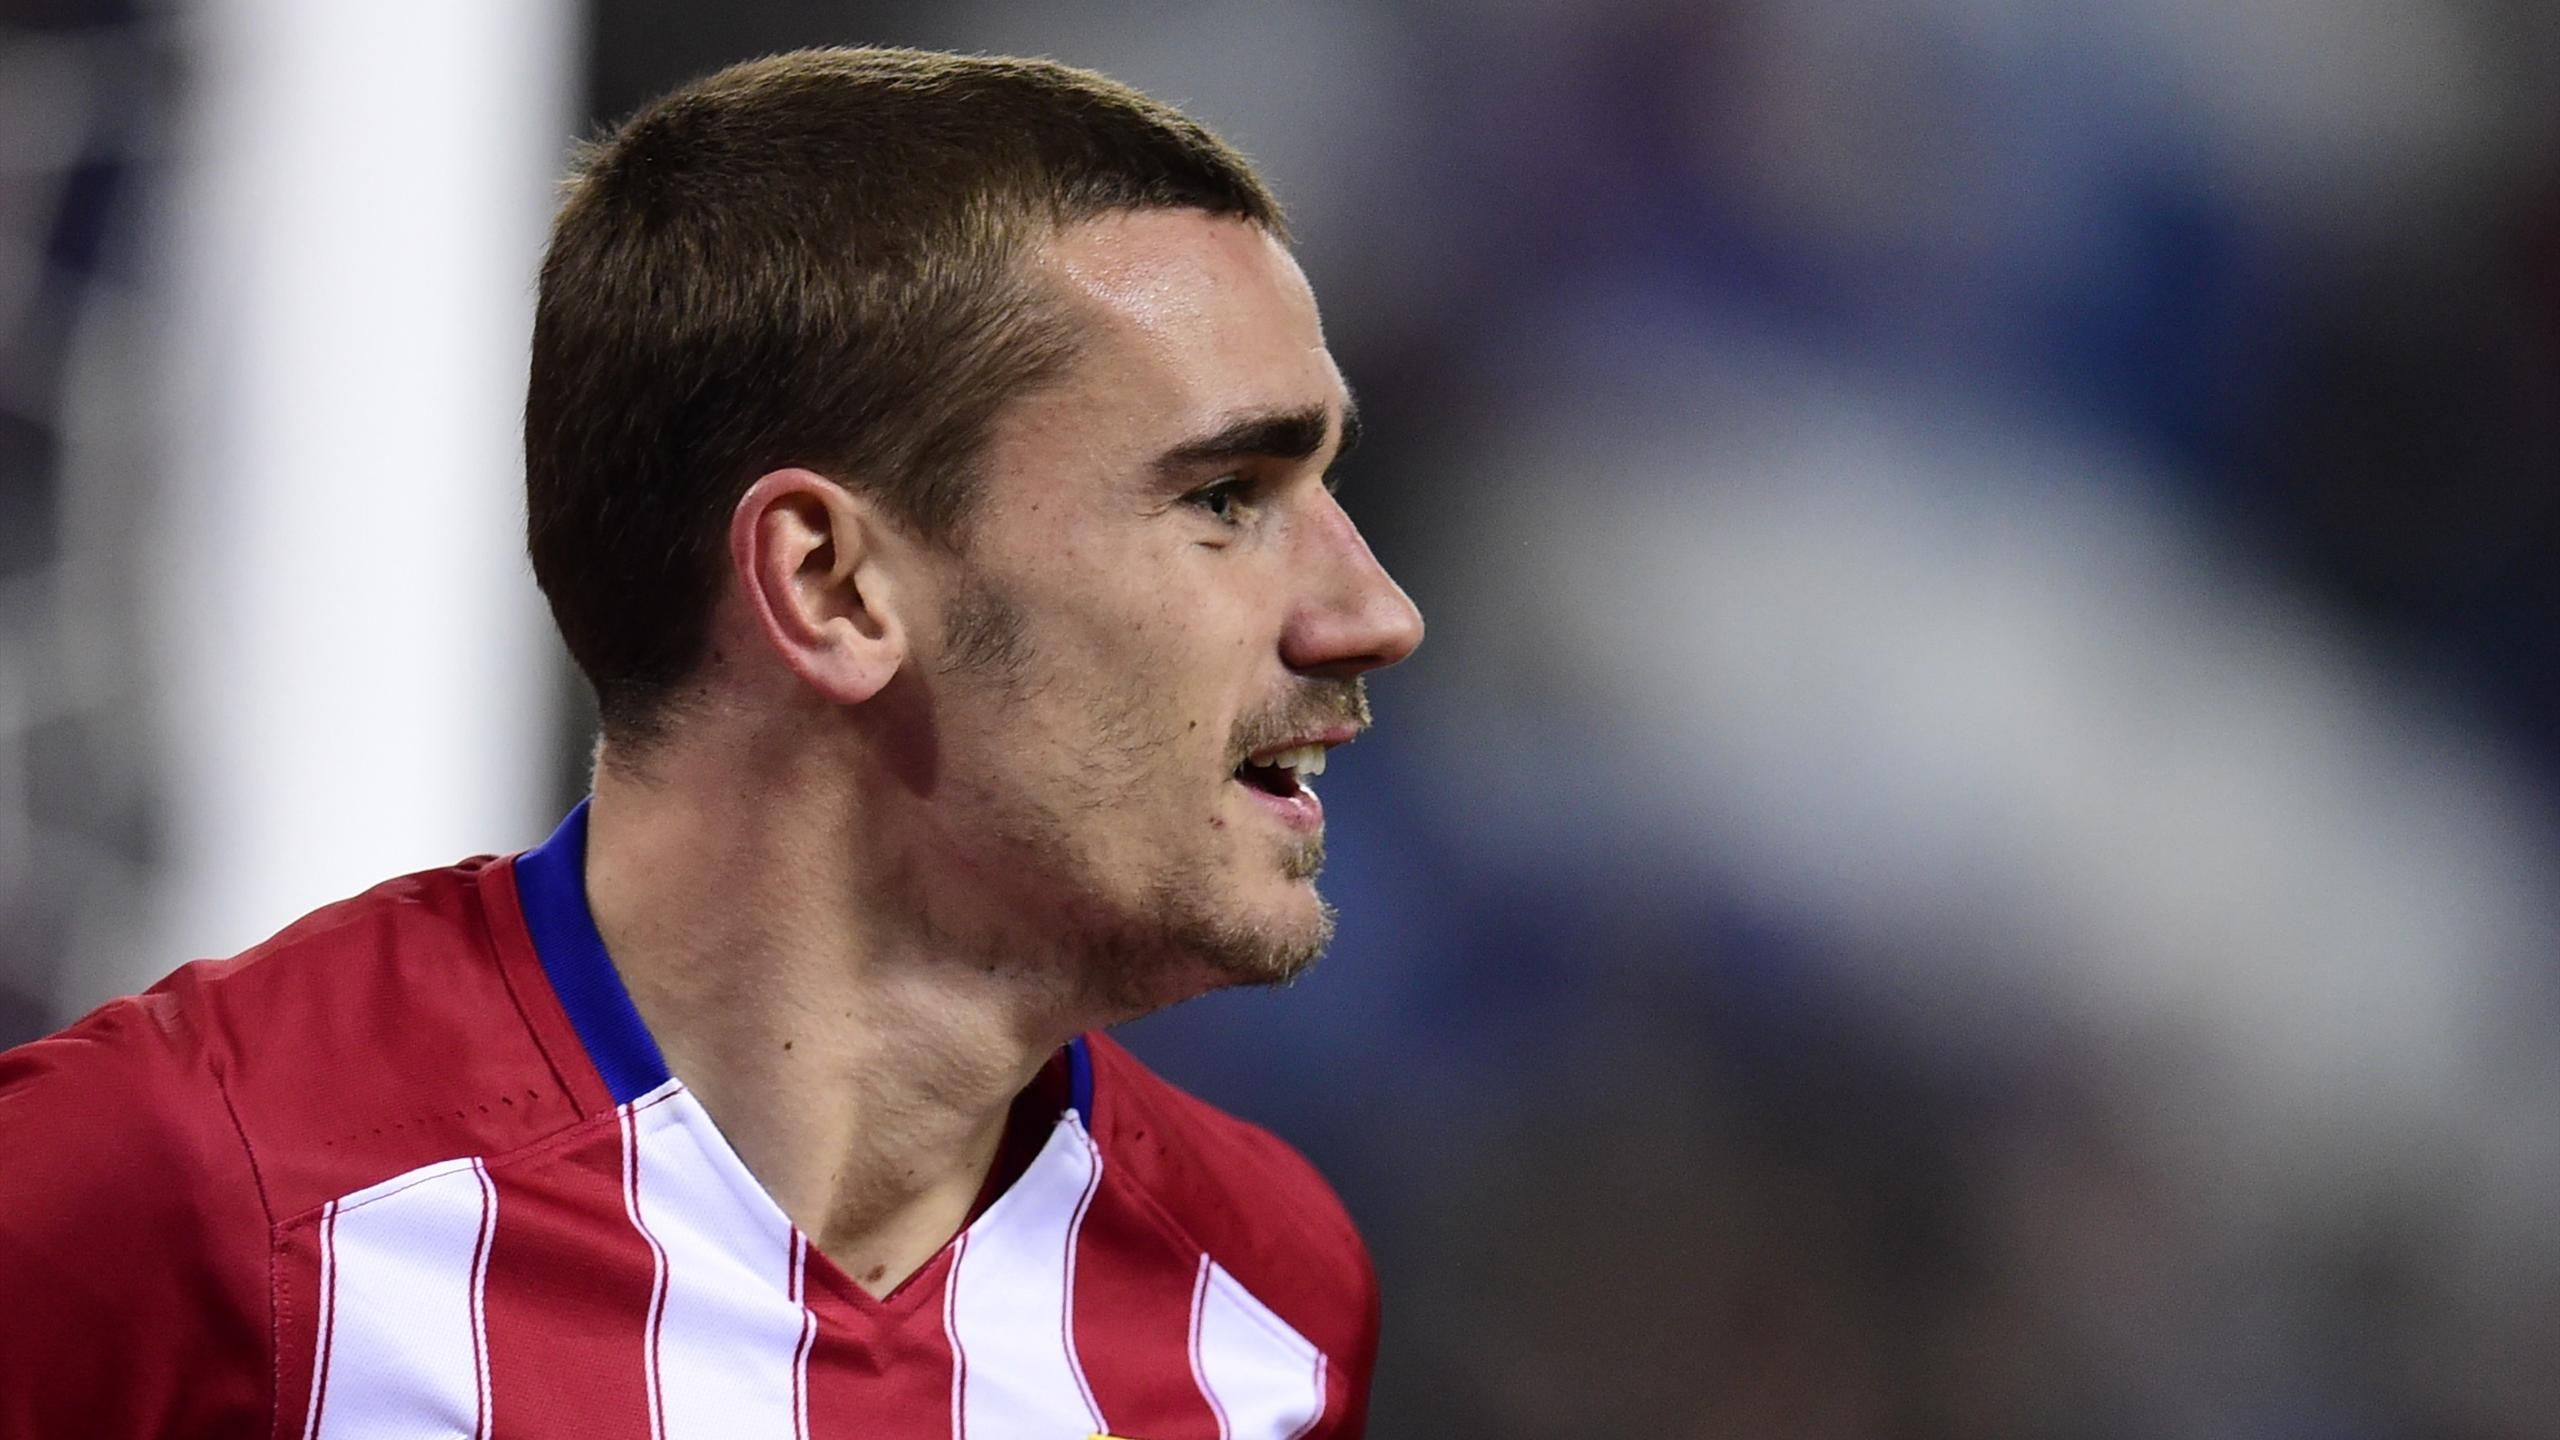 Antoine Griezmann gets brutally mocked on social media after picture of his  radical new haircut is shared online - Mirror Online